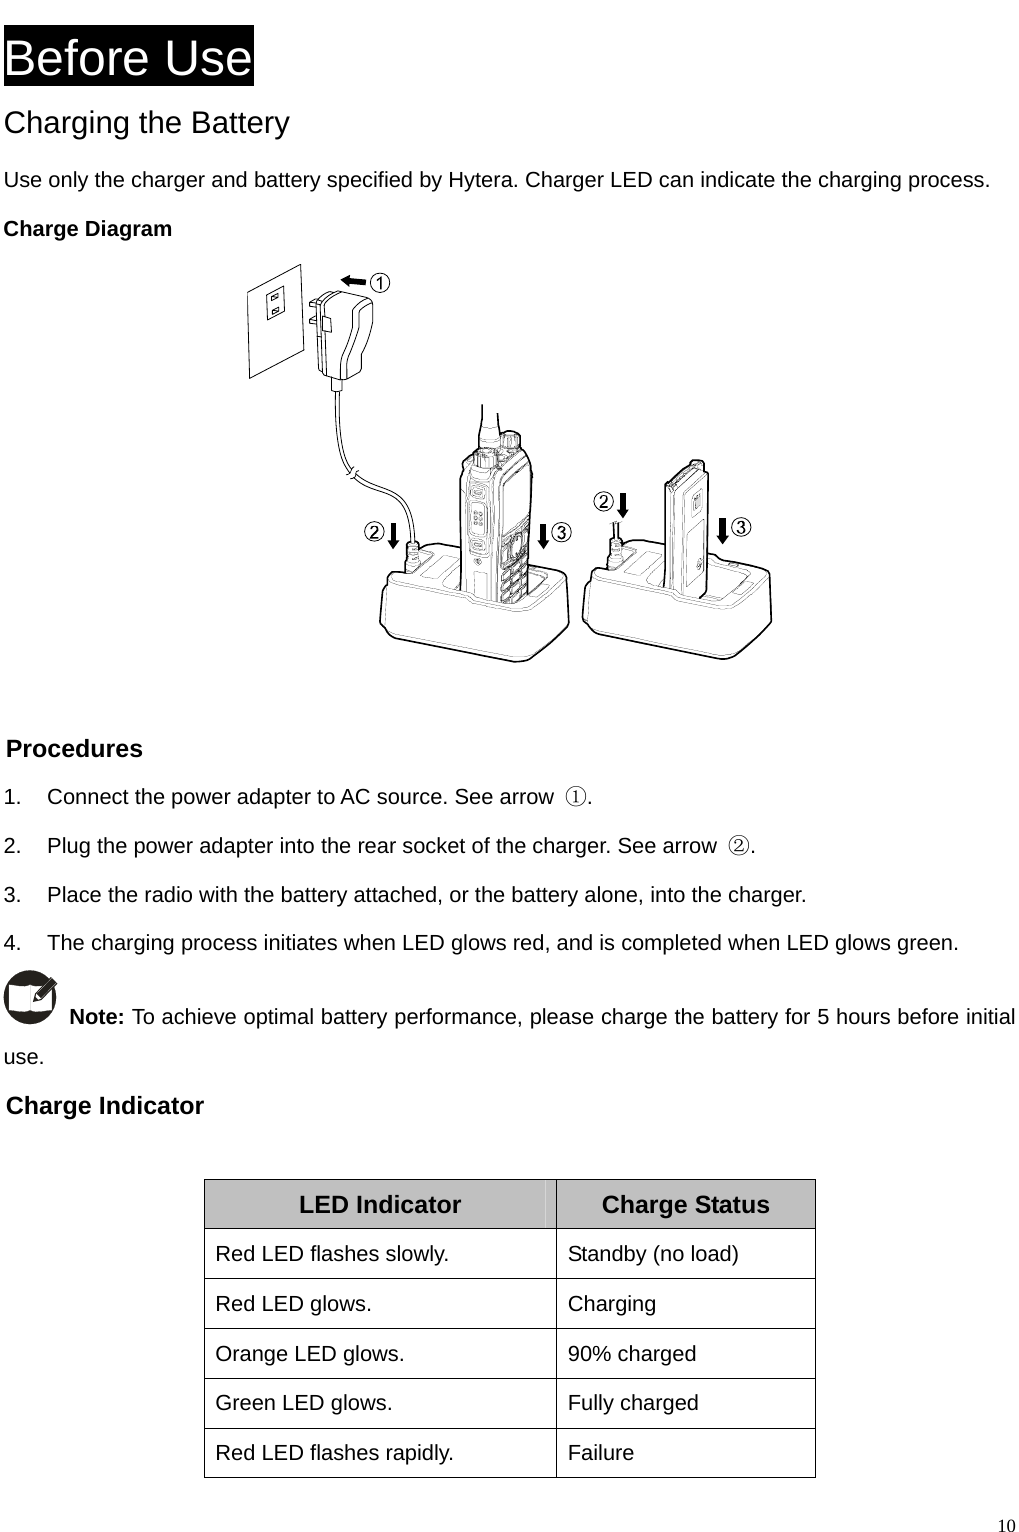                                                                                                            Before Use Charging the Battery Use only the charger and battery specified by Hytera. Charger LED can indicate the charging process.   Charge Diagram   Procedures 1.  Connect the power adapter to AC source. See arrow  ①. 2.  Plug the power adapter into the rear socket of the charger. See arrow  ②. 3.  Place the radio with the battery attached, or the battery alone, into the charger. 4.  The charging process initiates when LED glows red, and is completed when LED glows green.  Note: To achieve optimal battery performance, please charge the battery for 5 hours before initial use. Charge Indicator  LED Indicator Charge Status Red LED flashes slowly. Standby (no load) Red LED glows. Charging   Orange LED glows. 90% charged Green LED glows. Fully charged Red LED flashes rapidly. Failure   10